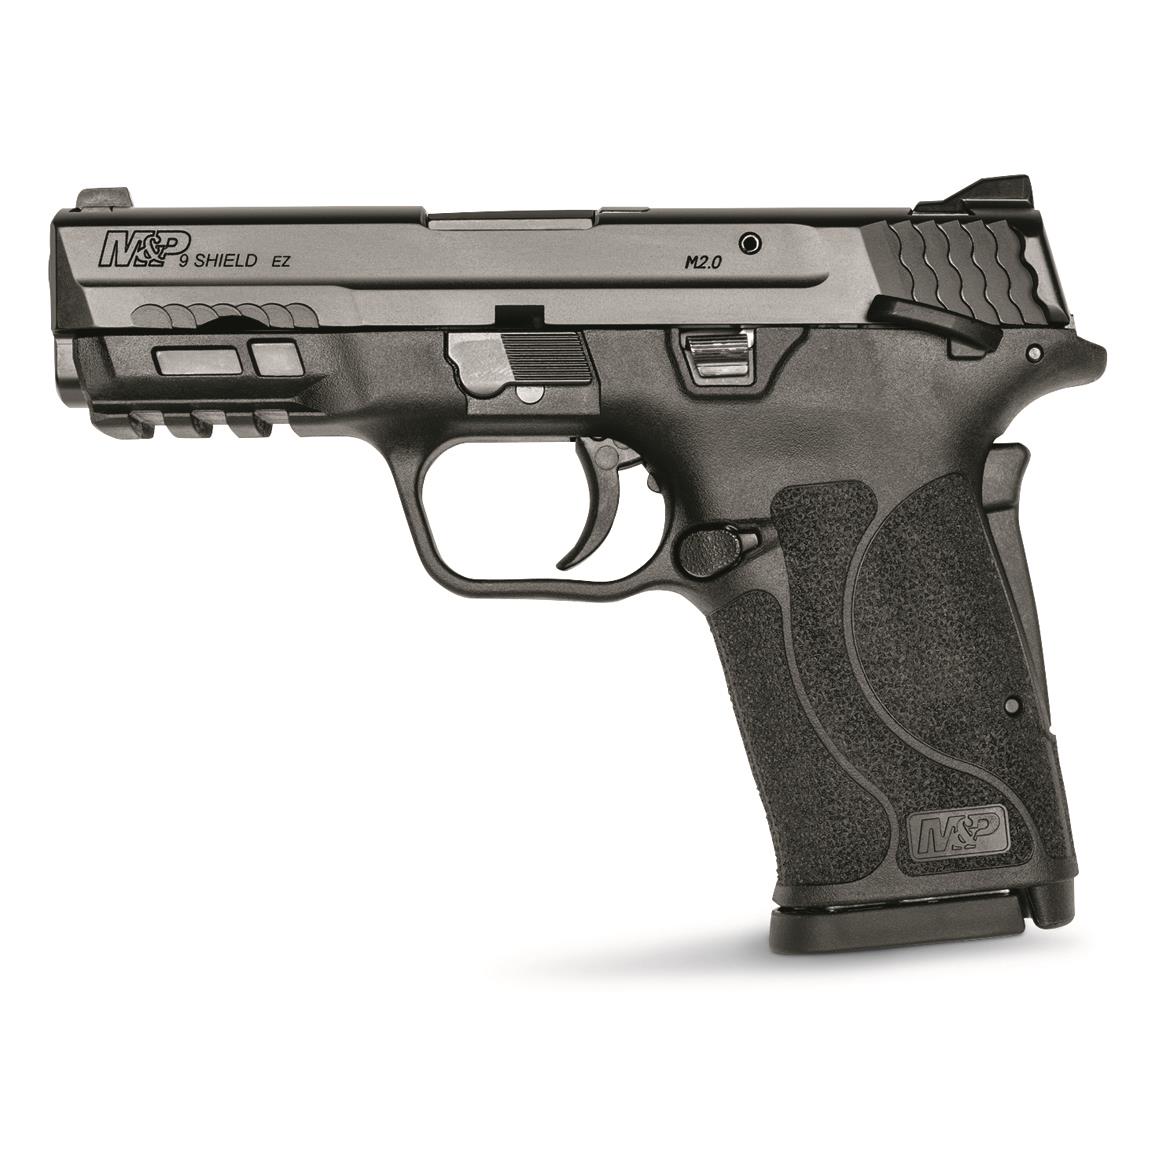 Smith & Wesson M&P9 SHIELD EZ, Semi-Automatic, 9mm,  3.675" Barrel, Manual Safety, 8+1 Rds.